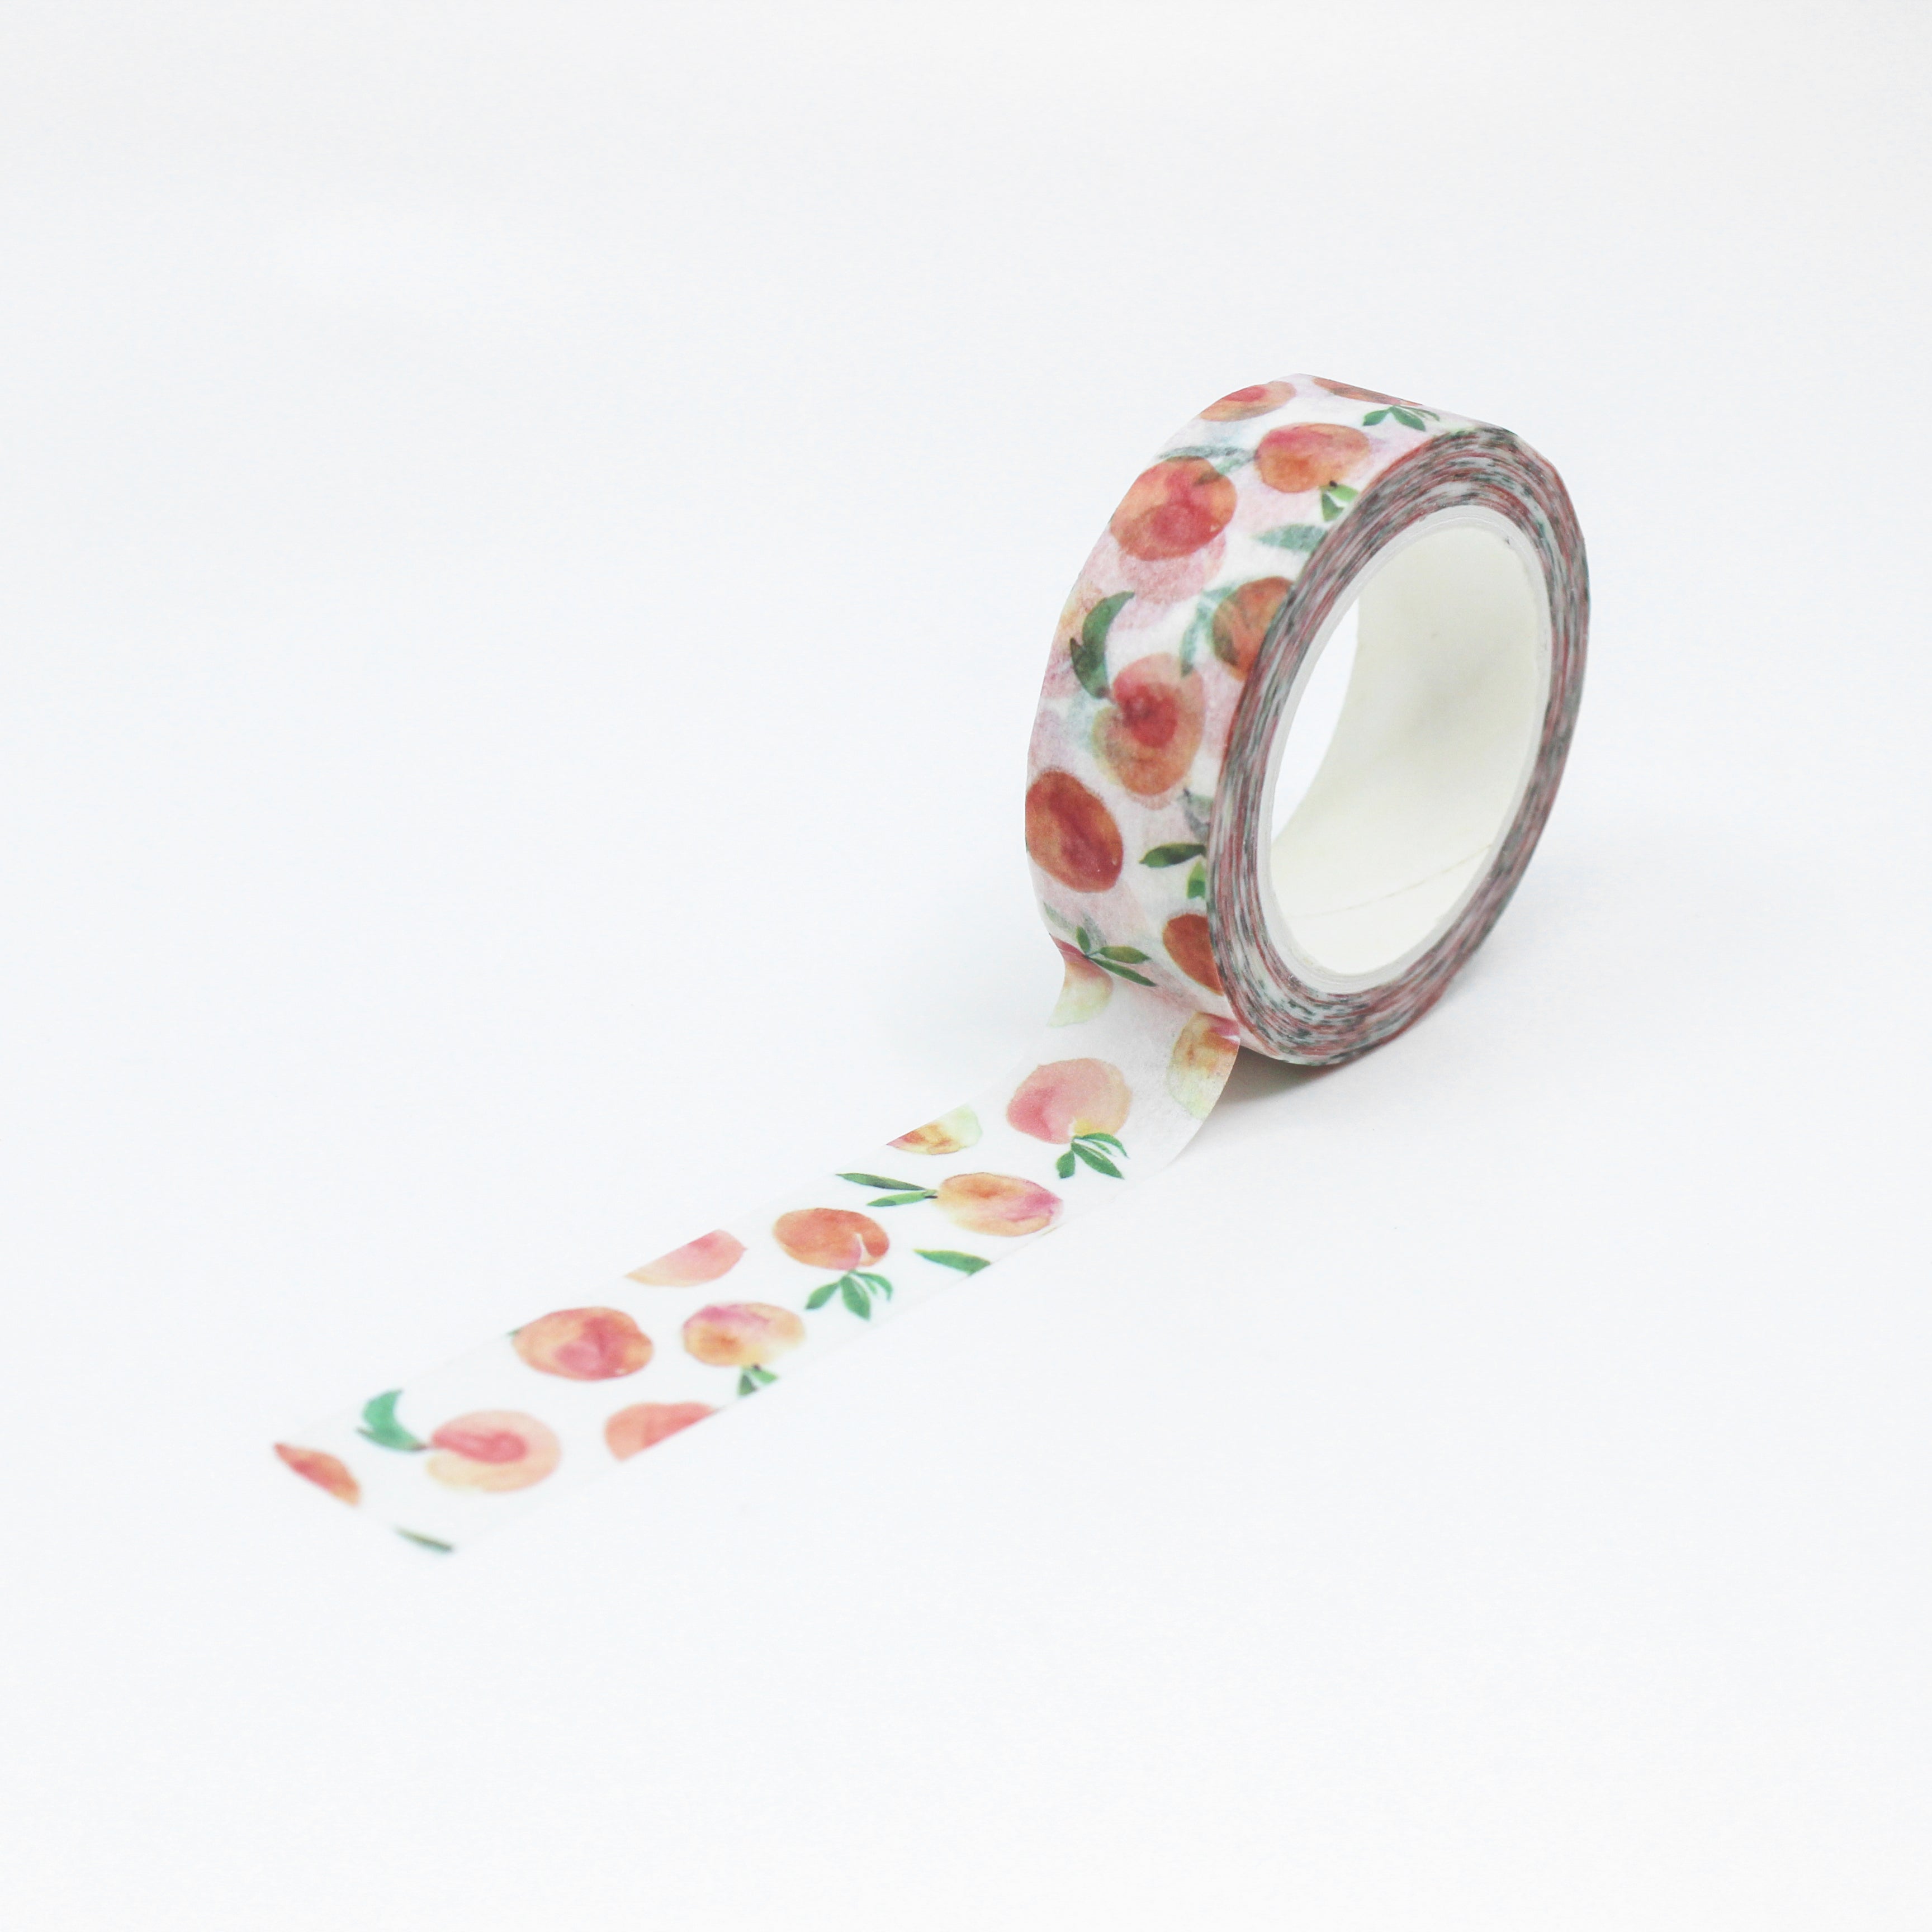 This is a full pattern repeat view of peach tropical fruit collections  washi tape from BBB Supplies Craft Shop